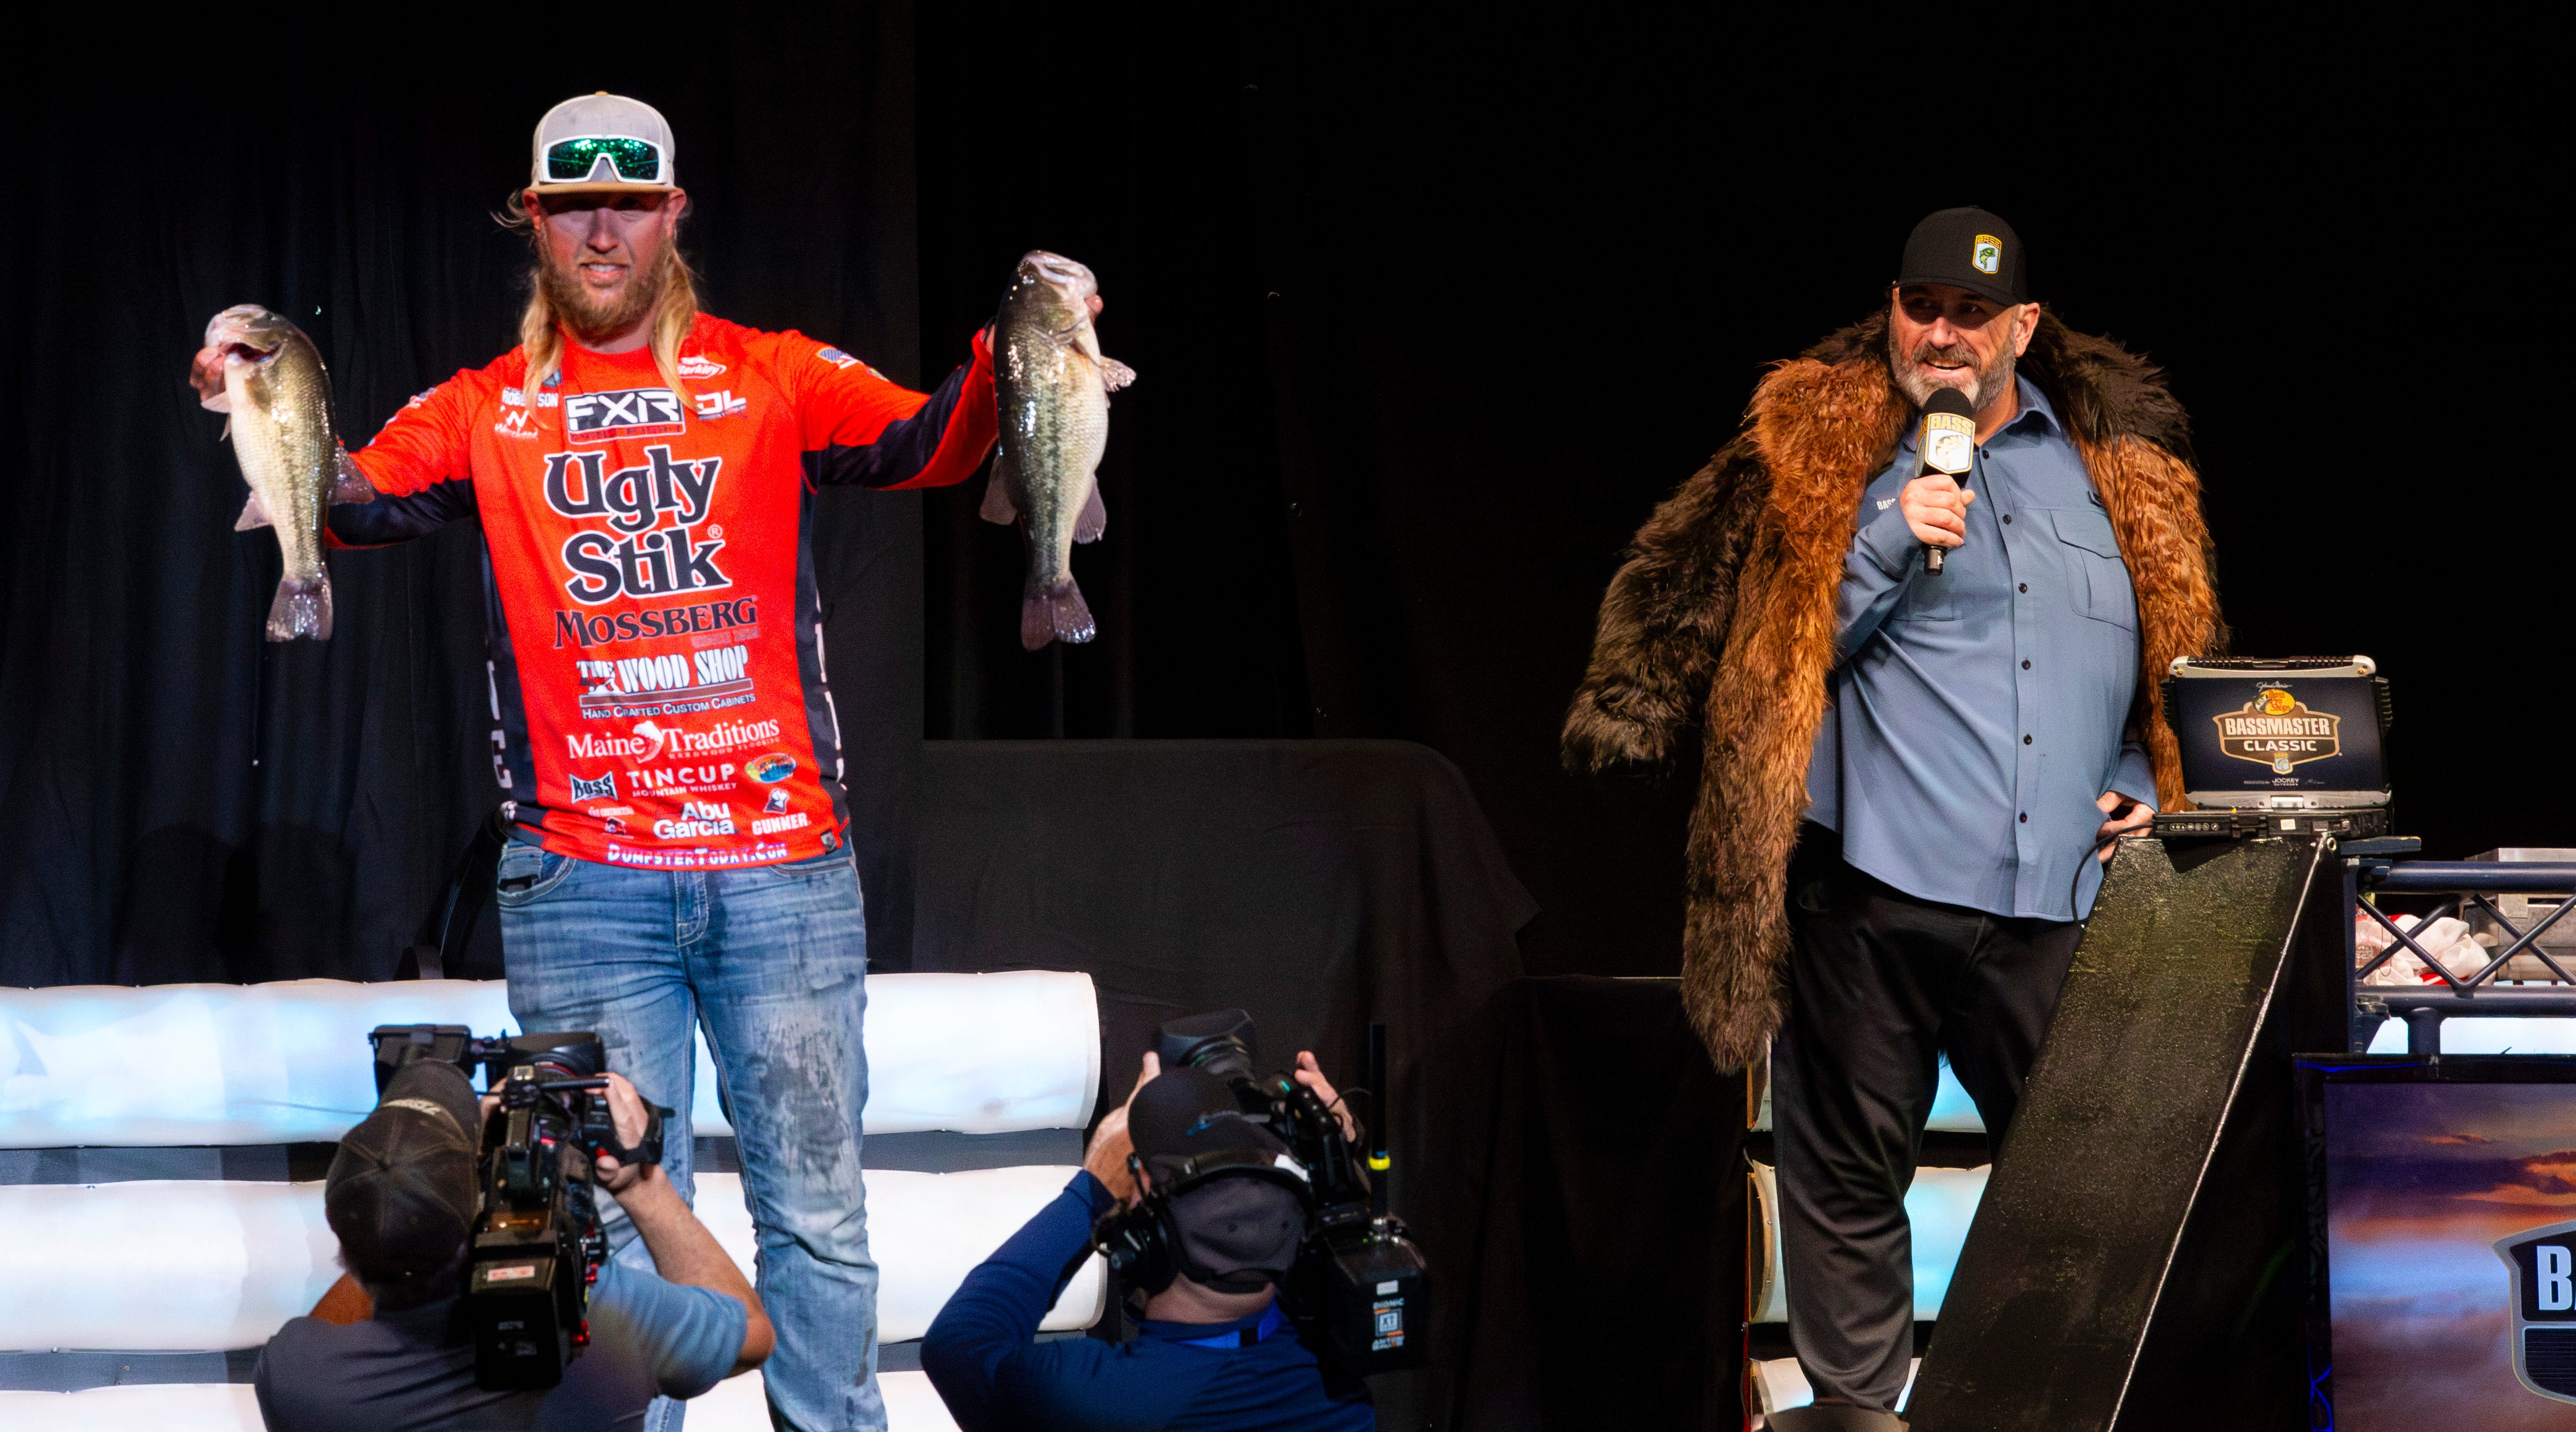 Top techniques of the 2013 Classic - Bassmaster